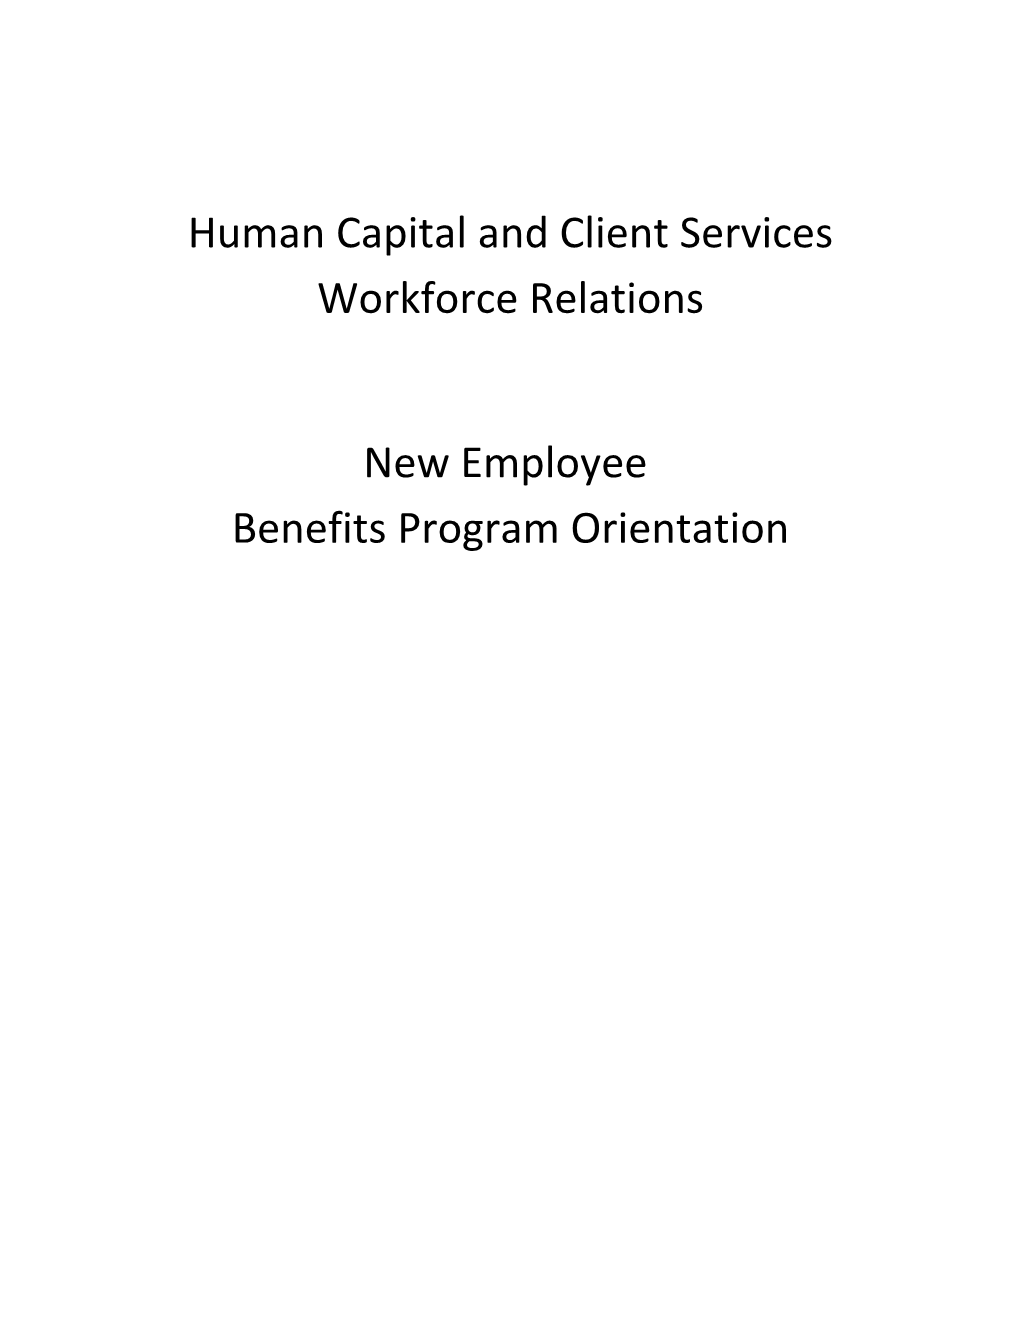 Human Capital and Client Services Workforce Relations